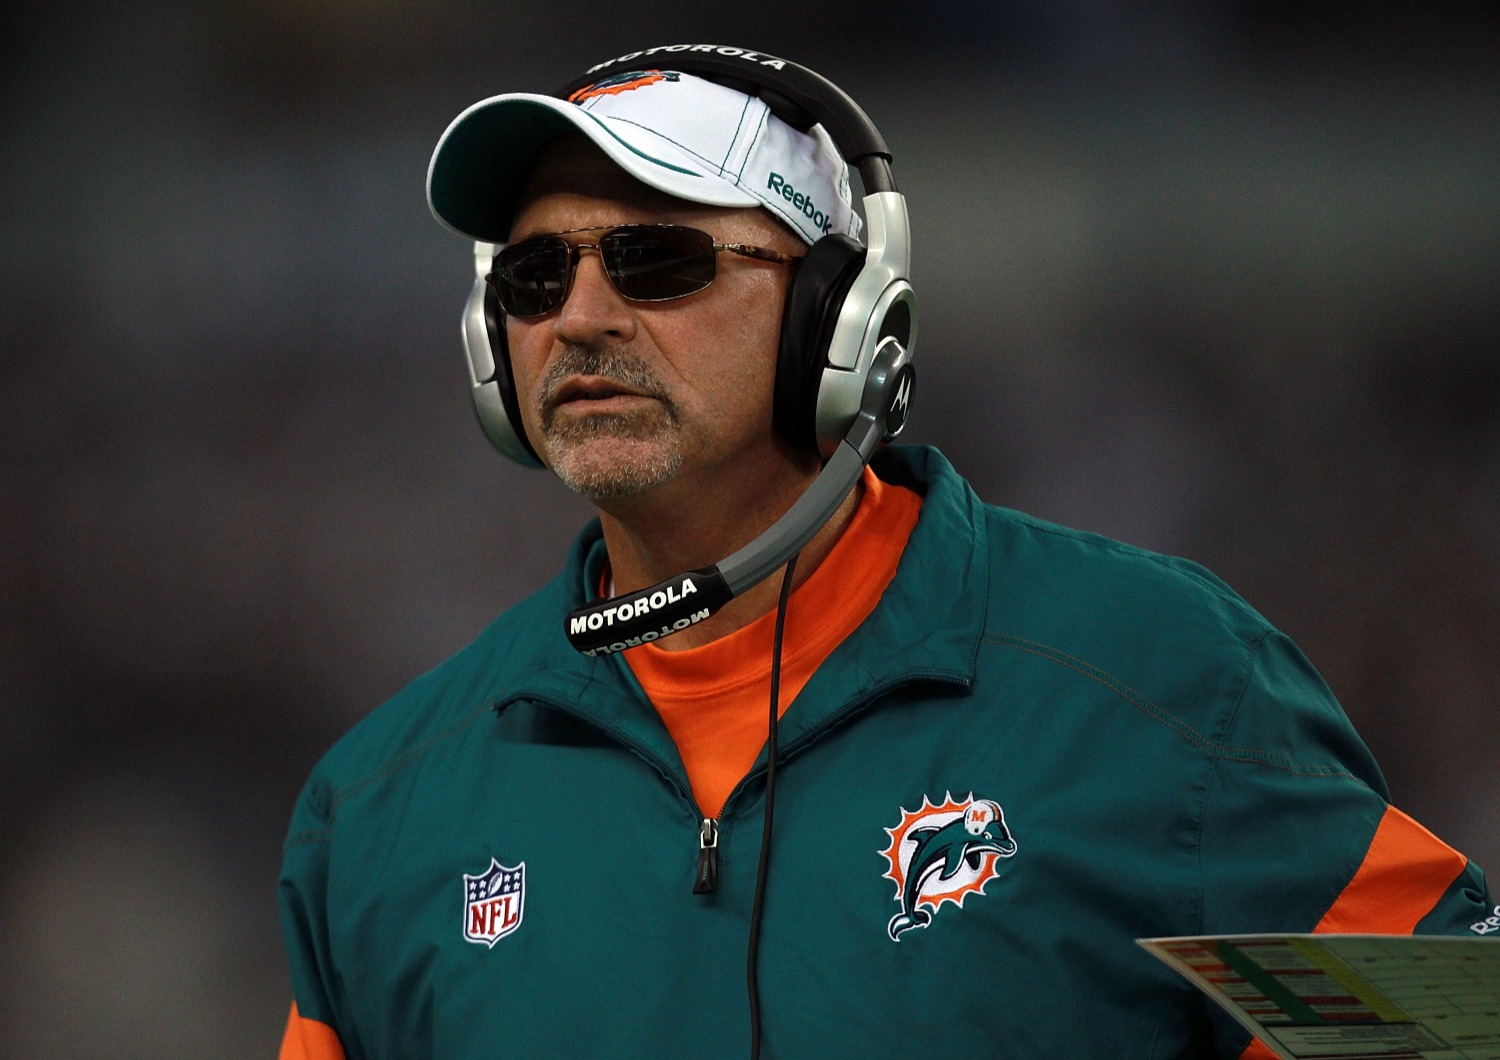 Former Miami Dolphins head coach Tony Sparano tragically died while getting ready to go to church.